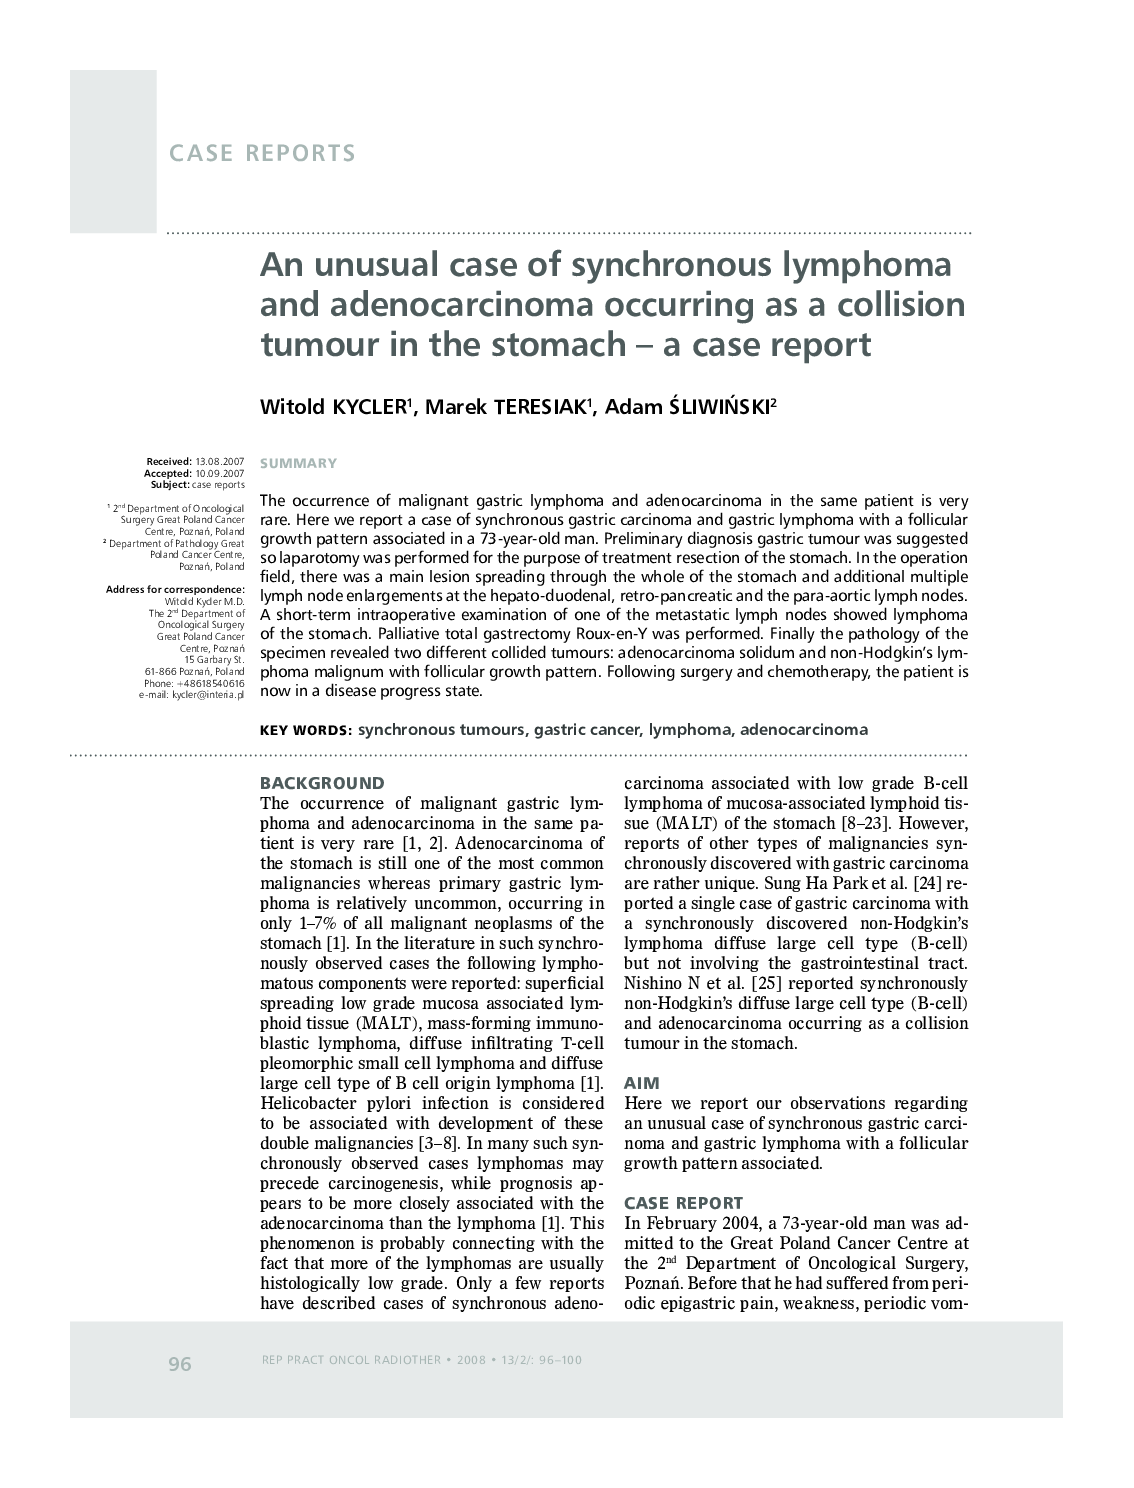 An unusual case of synchronous lymphoma and adenocarcinoma occurring as a collision tumour in the stomach – a case report